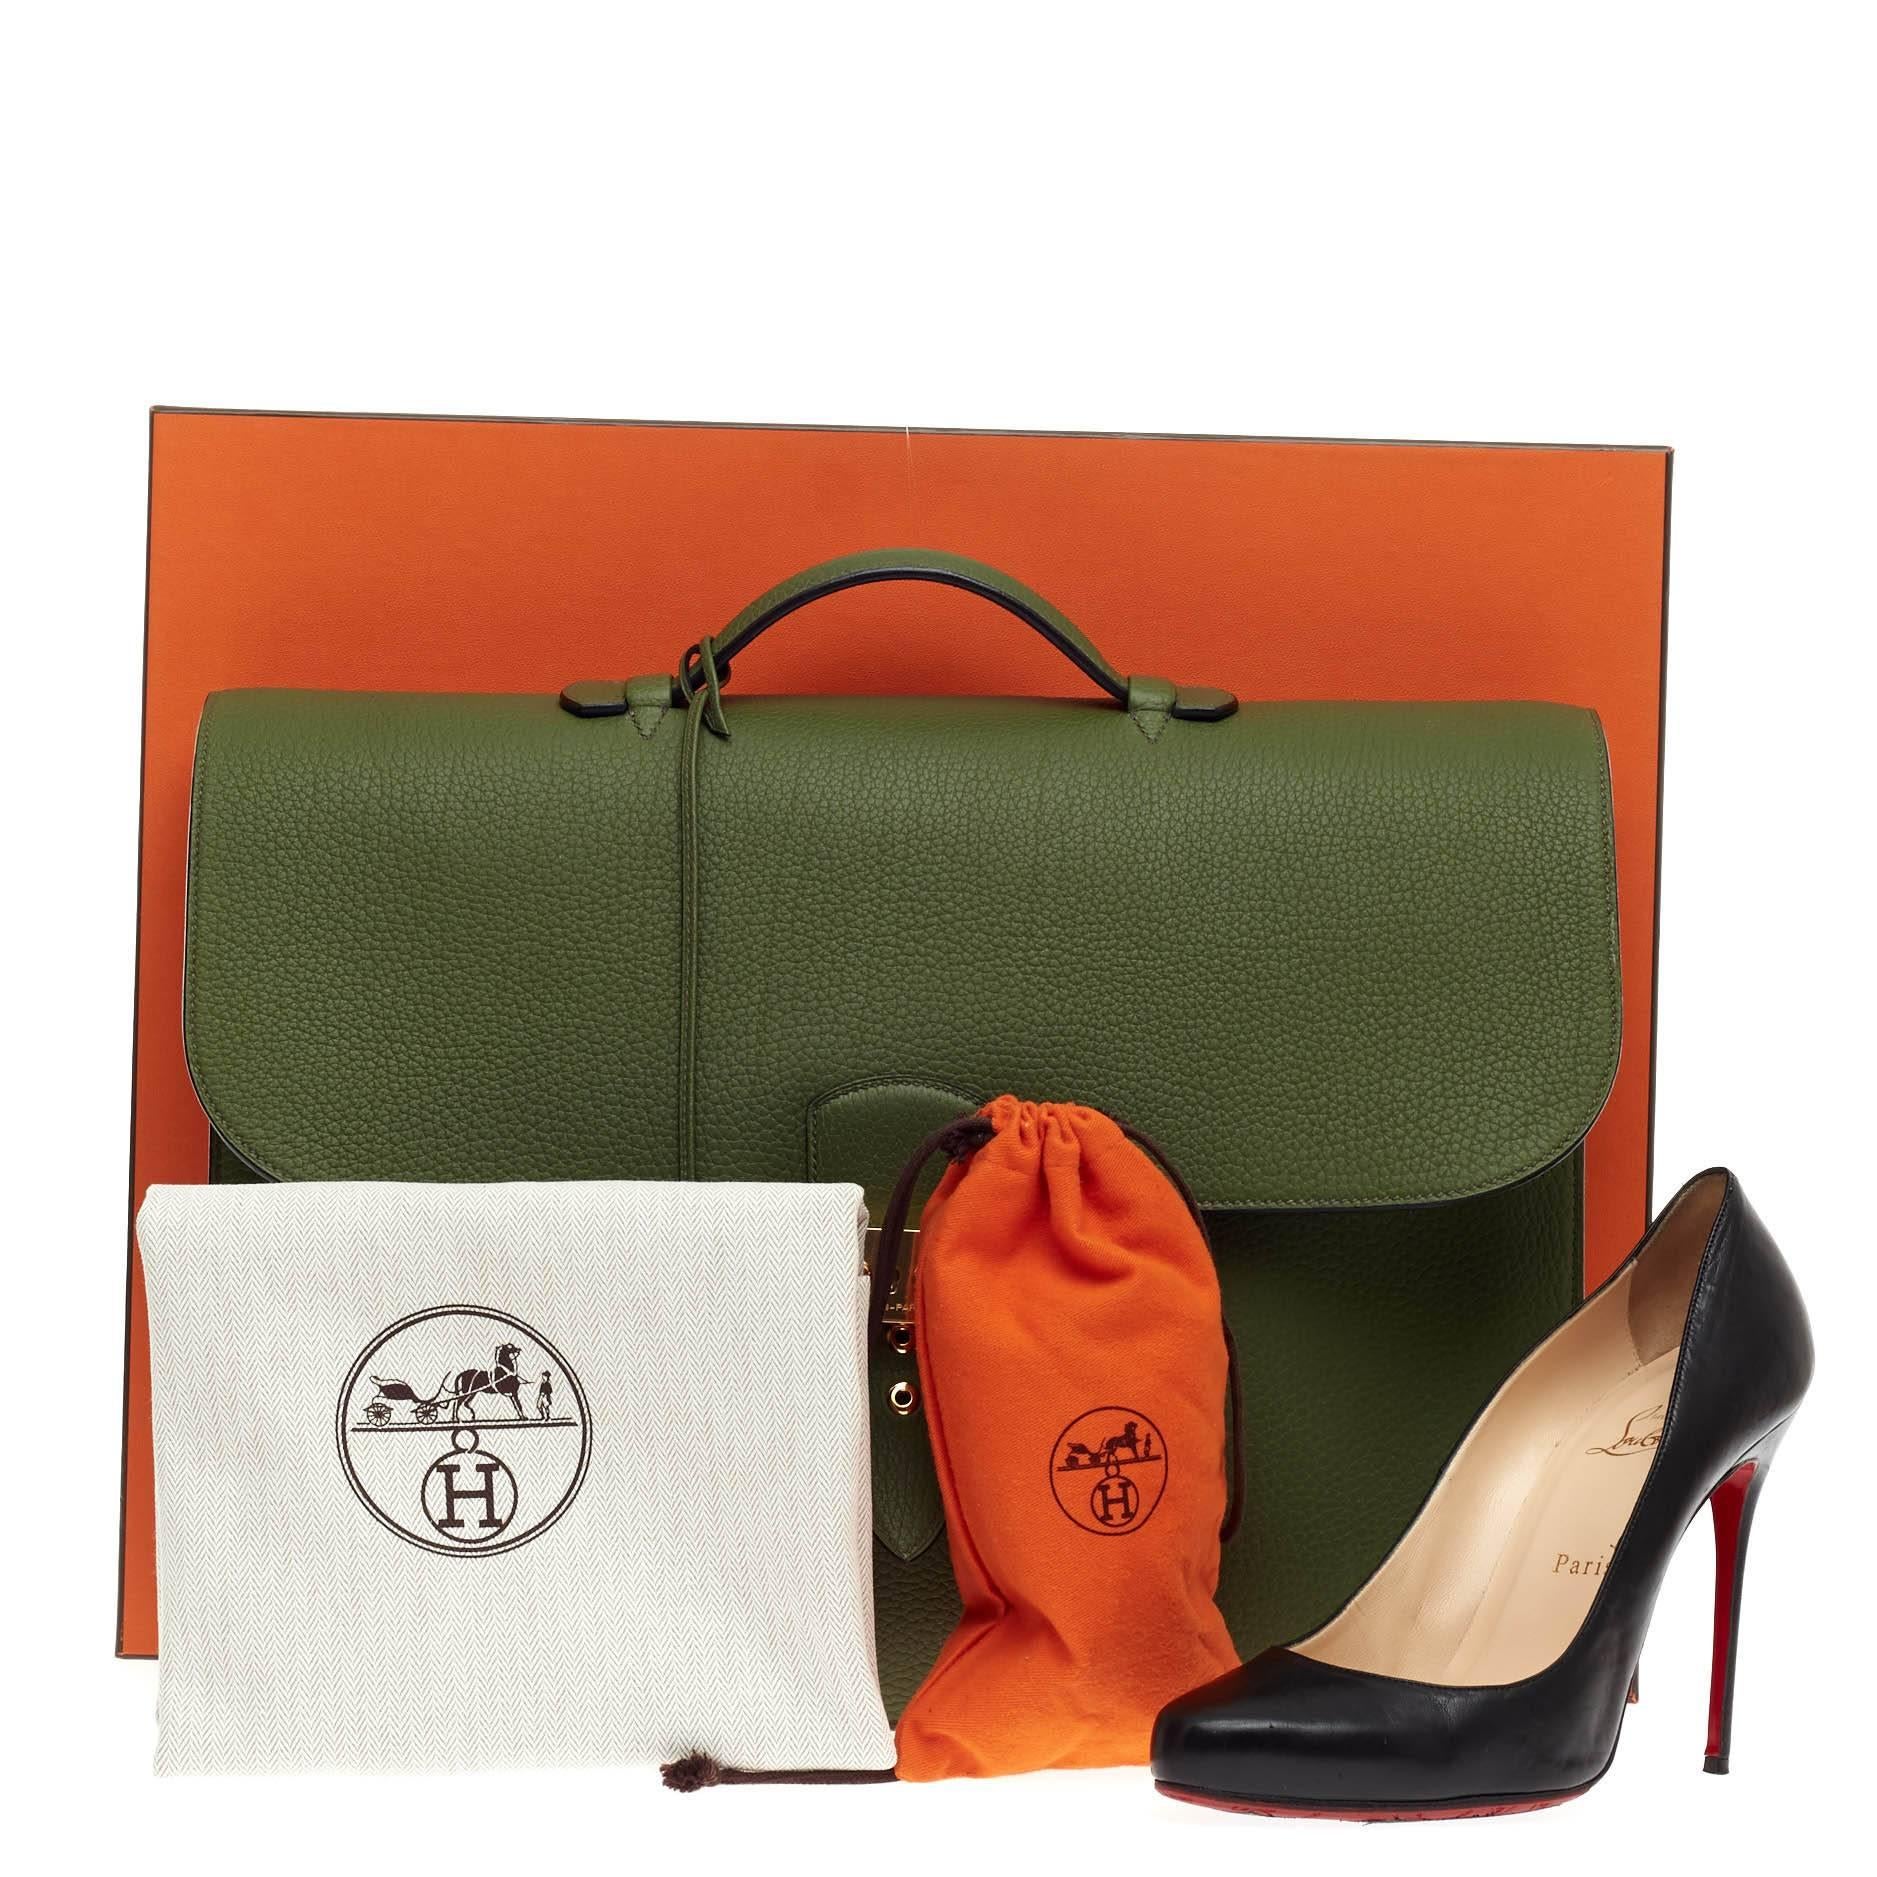 This authentic Hermes Sac a Depeche Fjord 40  showcases a simple yet modern style perfect for everyday office use. Crafted from vert feuillage green fjord leather, this beautiful, timeless briefcase features flat top handle, accordion-like side